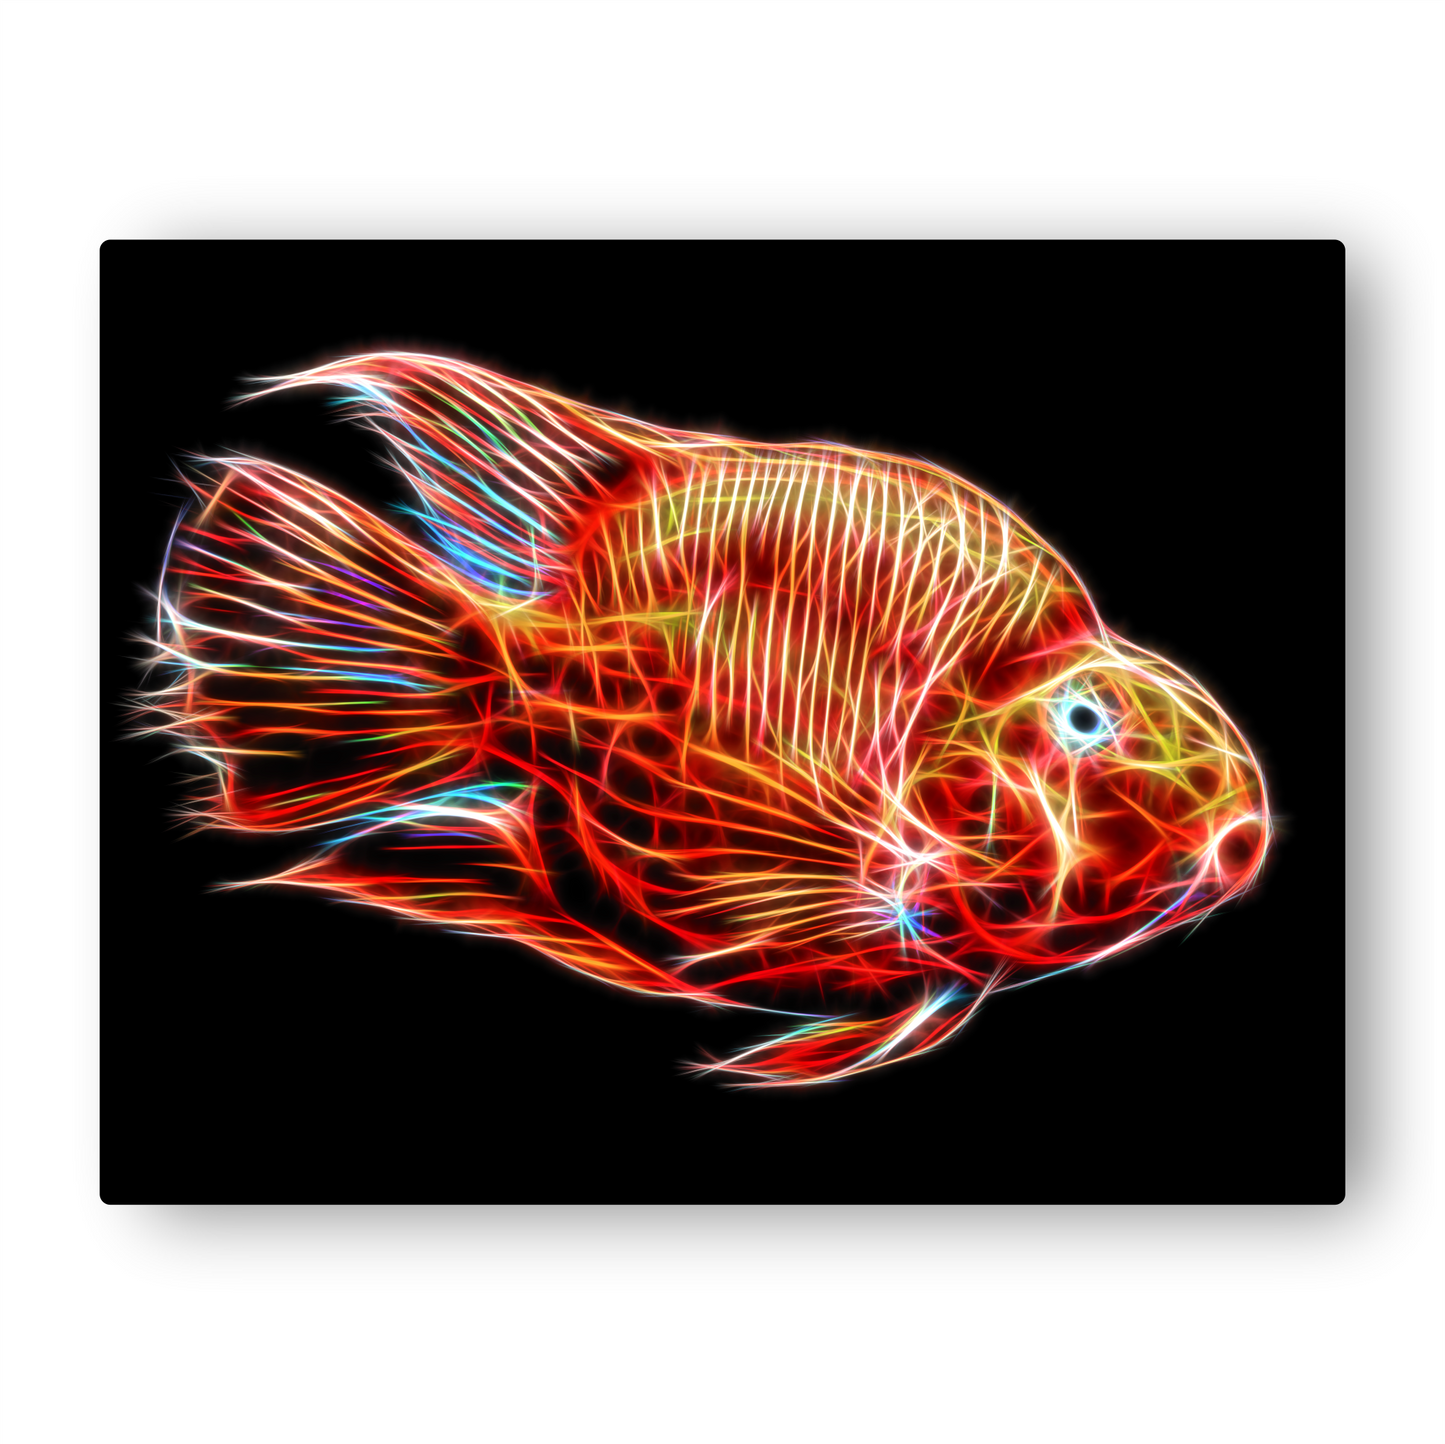 Red Blood Parrot Cichlid Aluminium Metal Wall Plaque